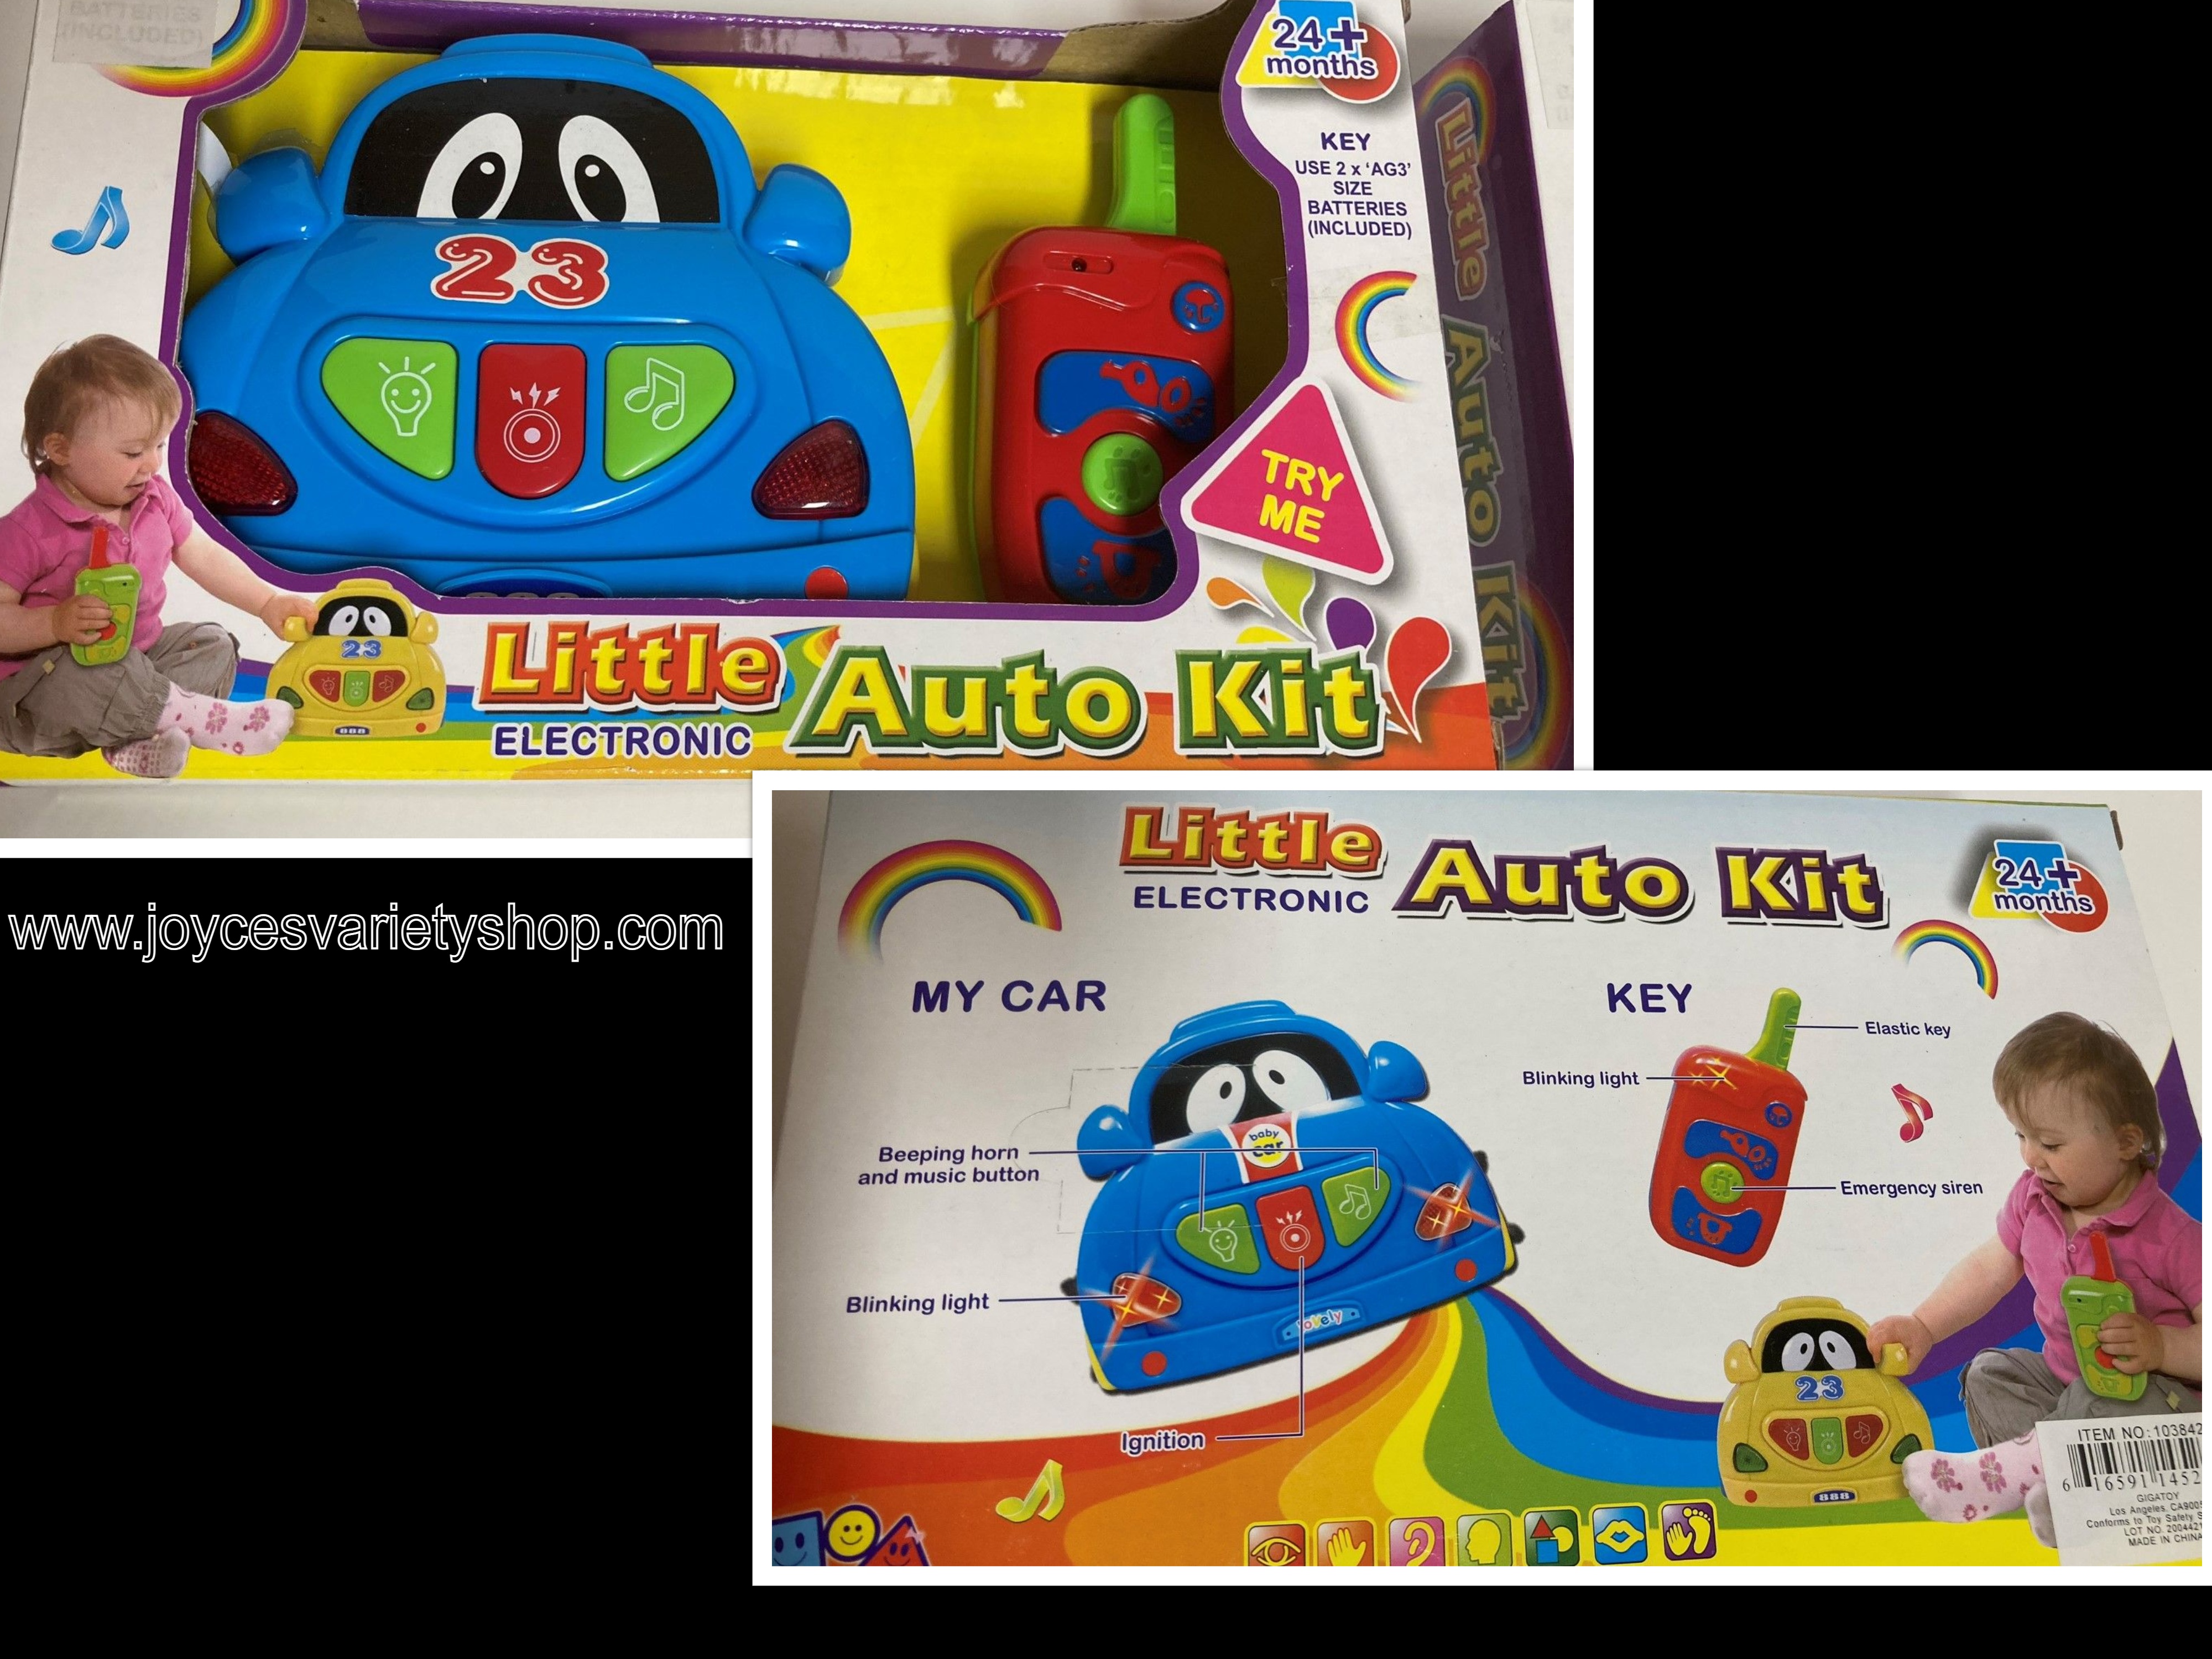 Baby Toy Little Electronic Auto Kit 24 Months+ Blue or Yellow 2 AA Batteries